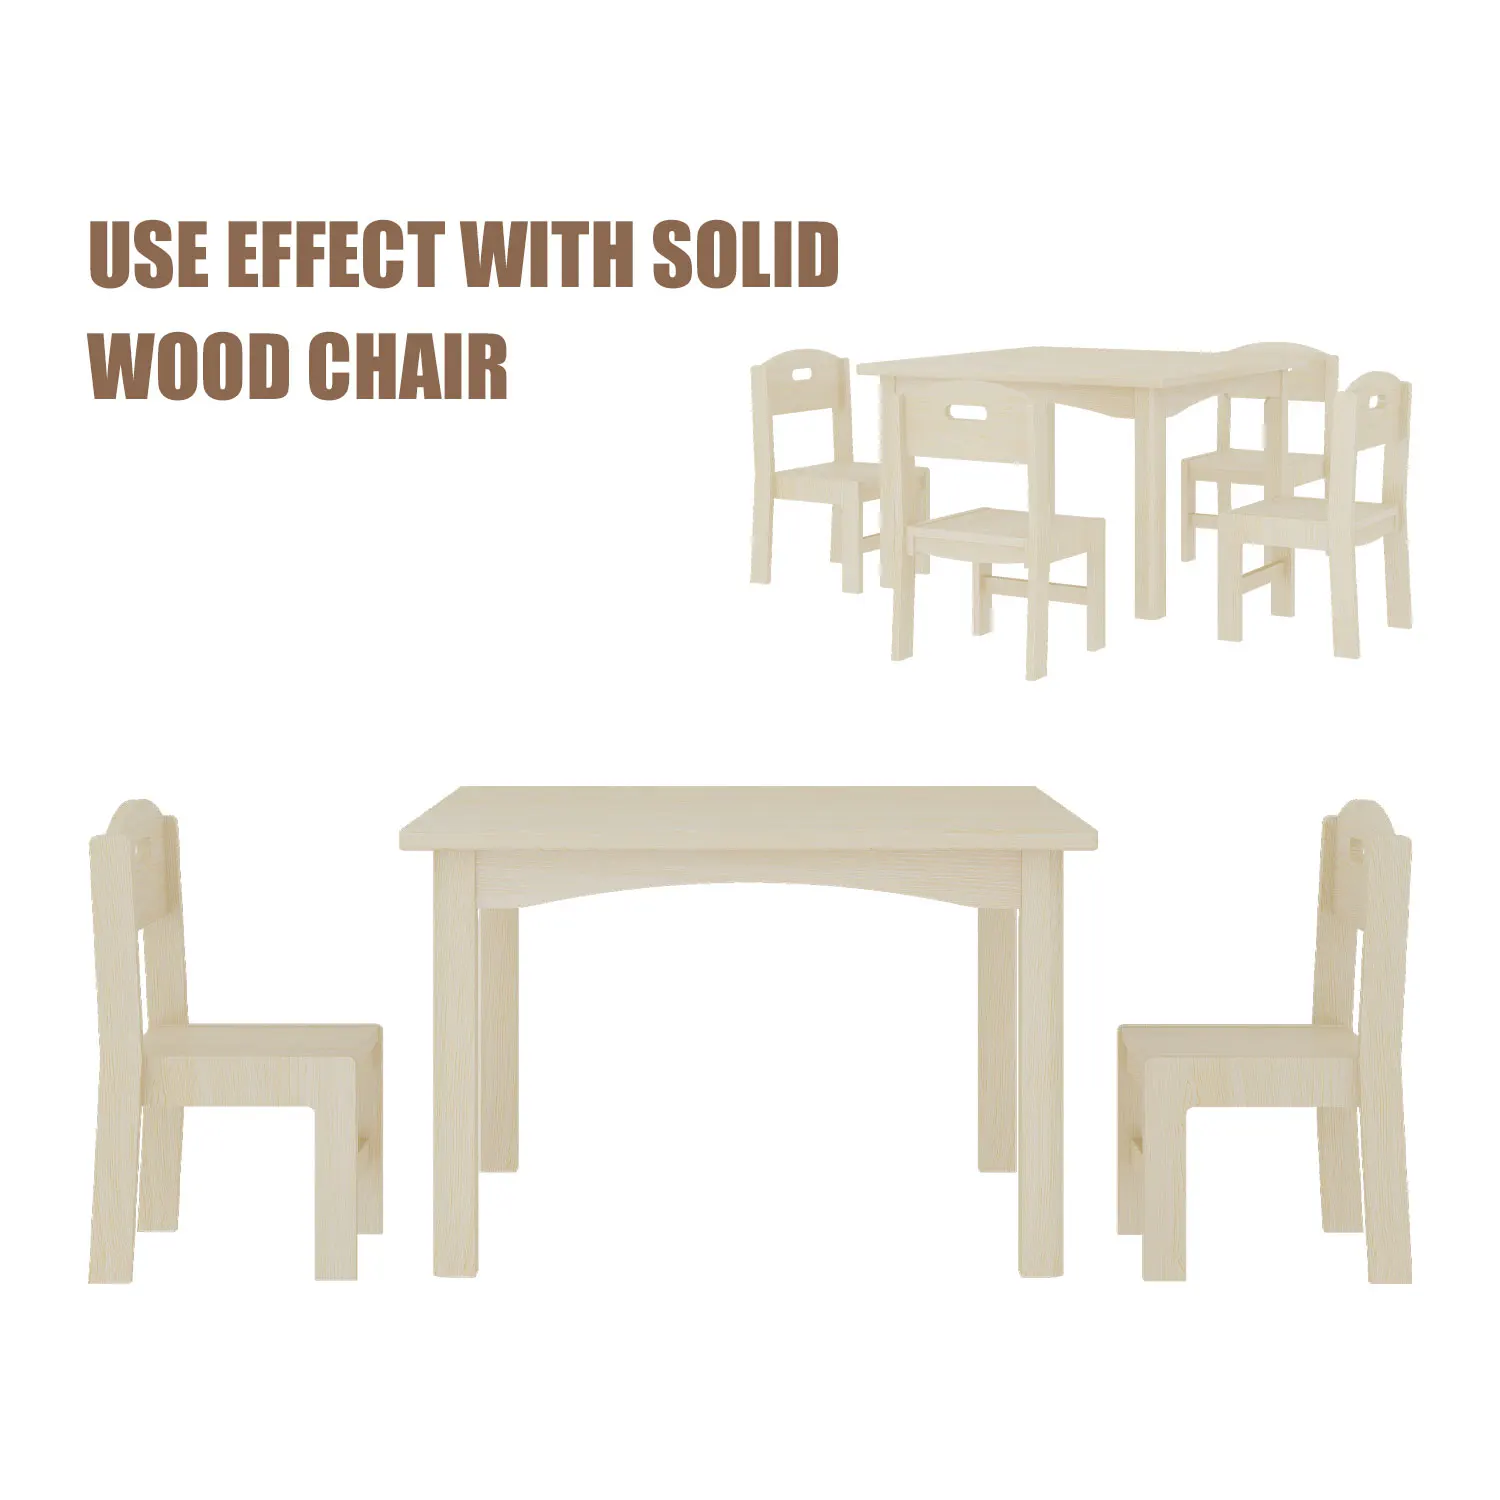 Professional customization wooden study reading kids table and chairs for kids